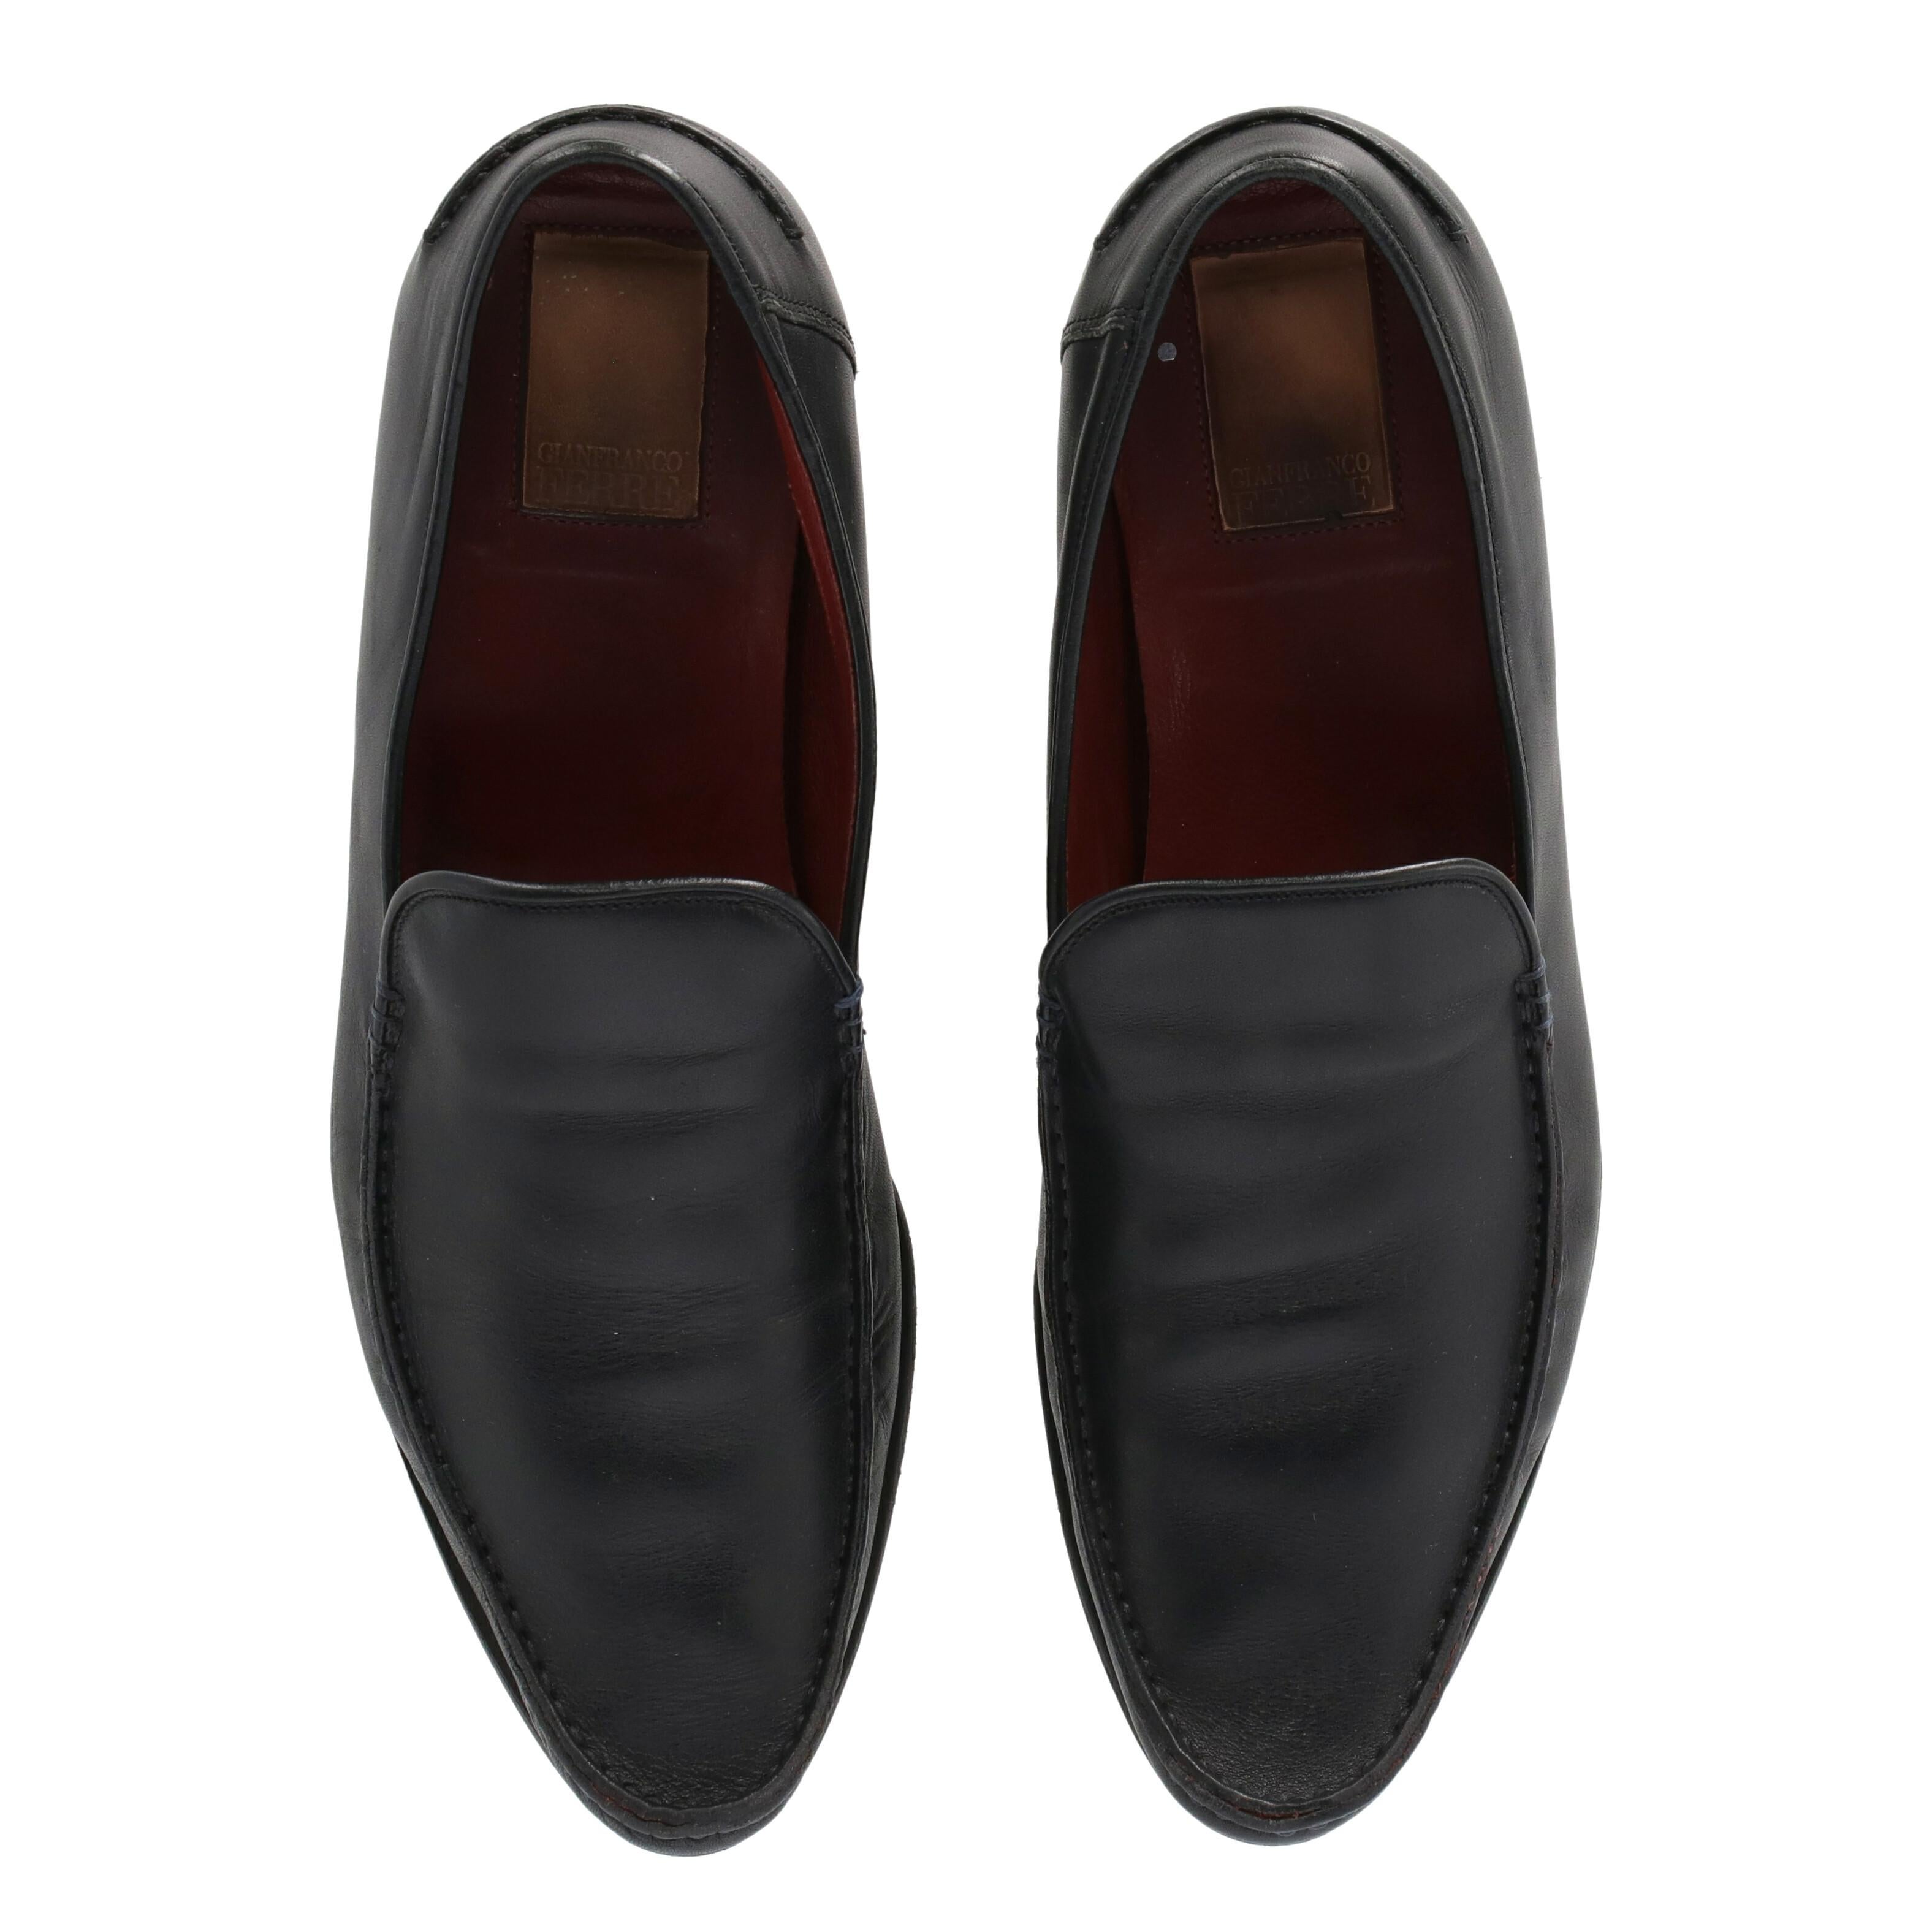 2000s Gianfranco Ferré Black Leather Loafers For Sale 1